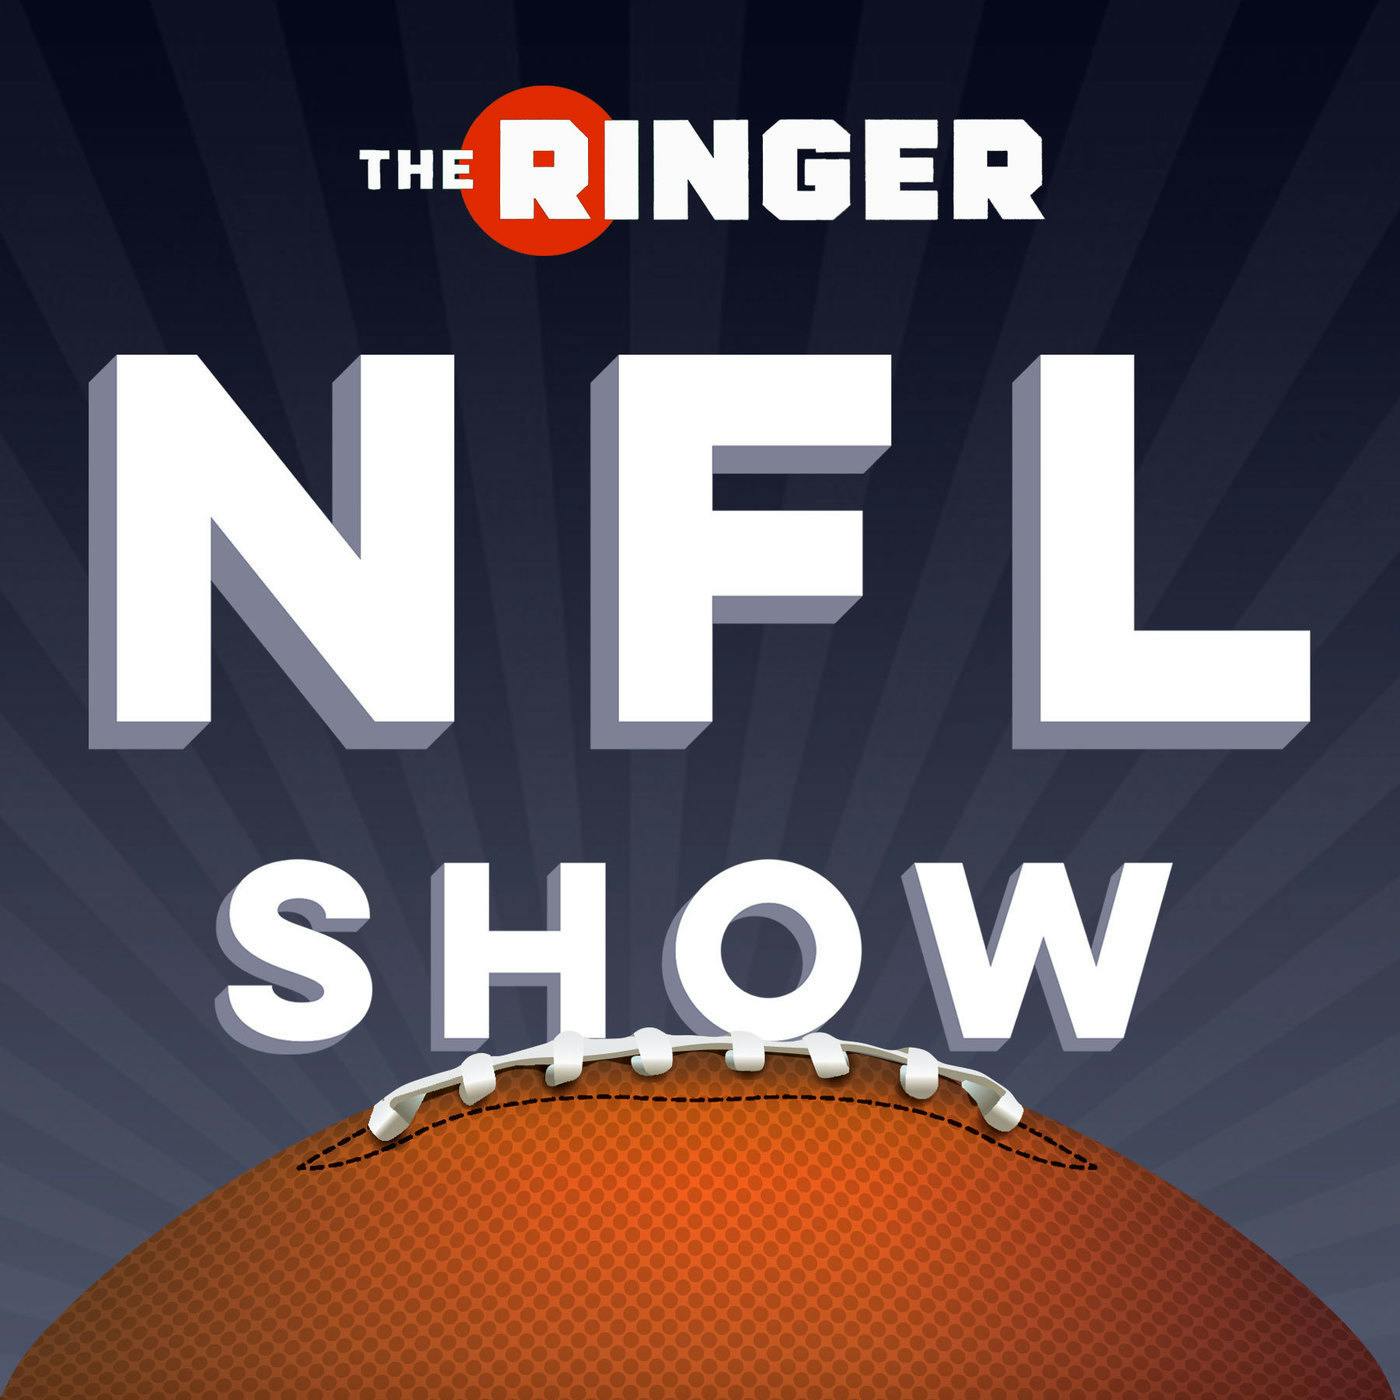 Judging College QBs With Warren Sharp, Plus the Most Exciting Prospects With Danny Kelly | The Ringer NFL Show